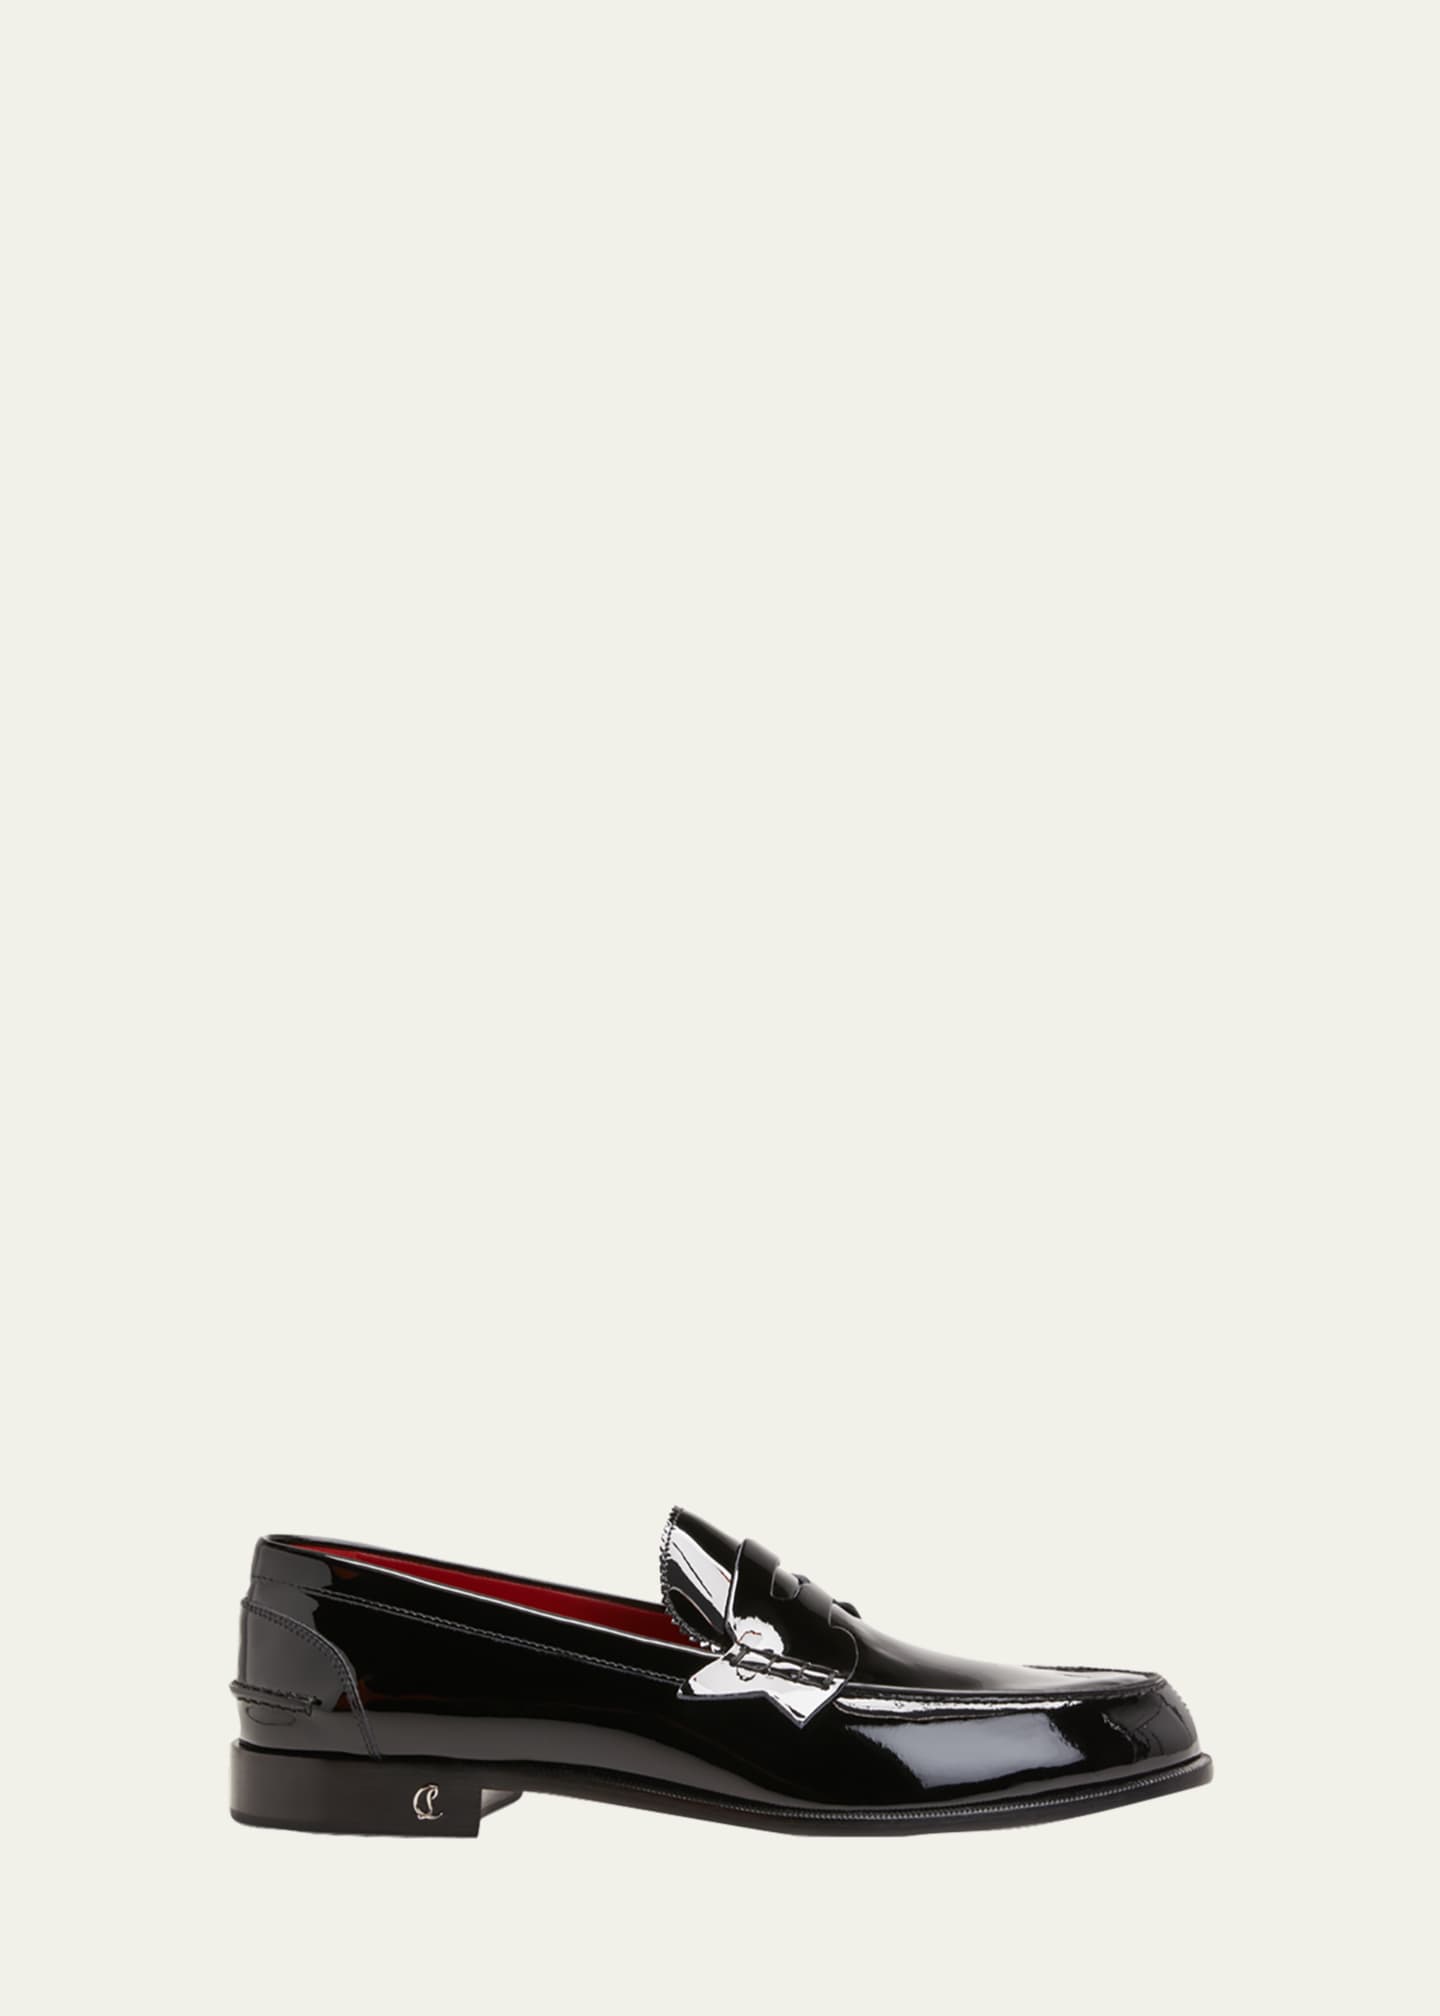 Christian louboutin man shoes leather loafers  Christian louboutin shoes  mens, Mens fashion shoes, Louboutin shoes mens